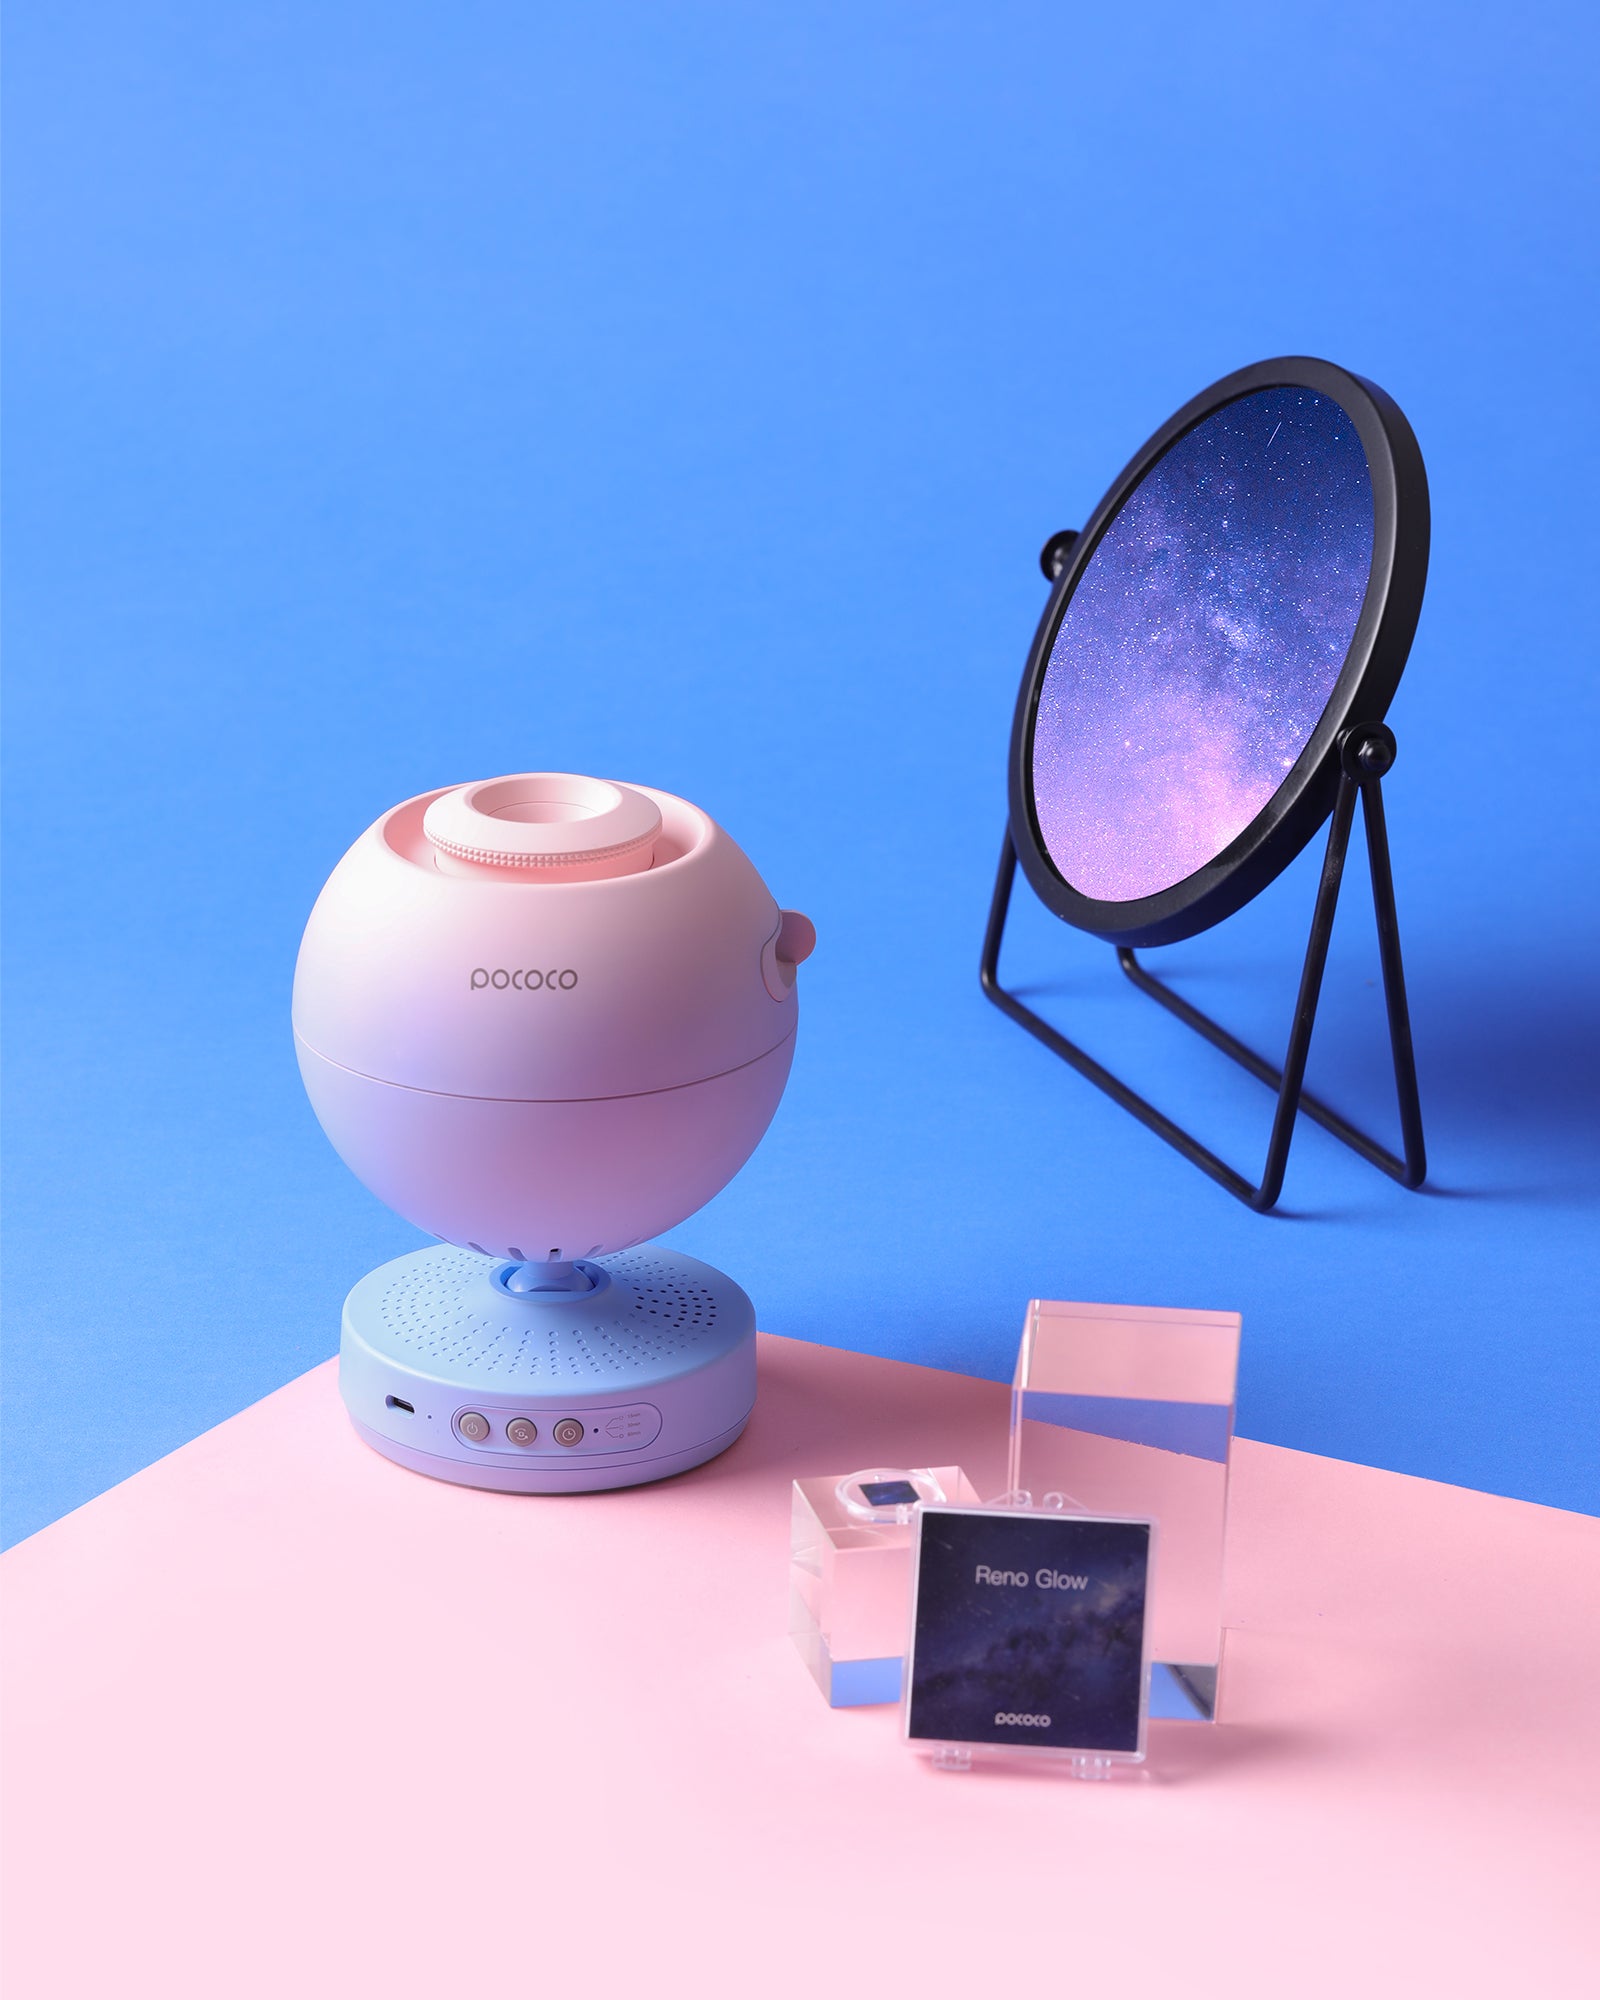 Galaxy Projector | Star Projector | Blue and Pink - POCOCO